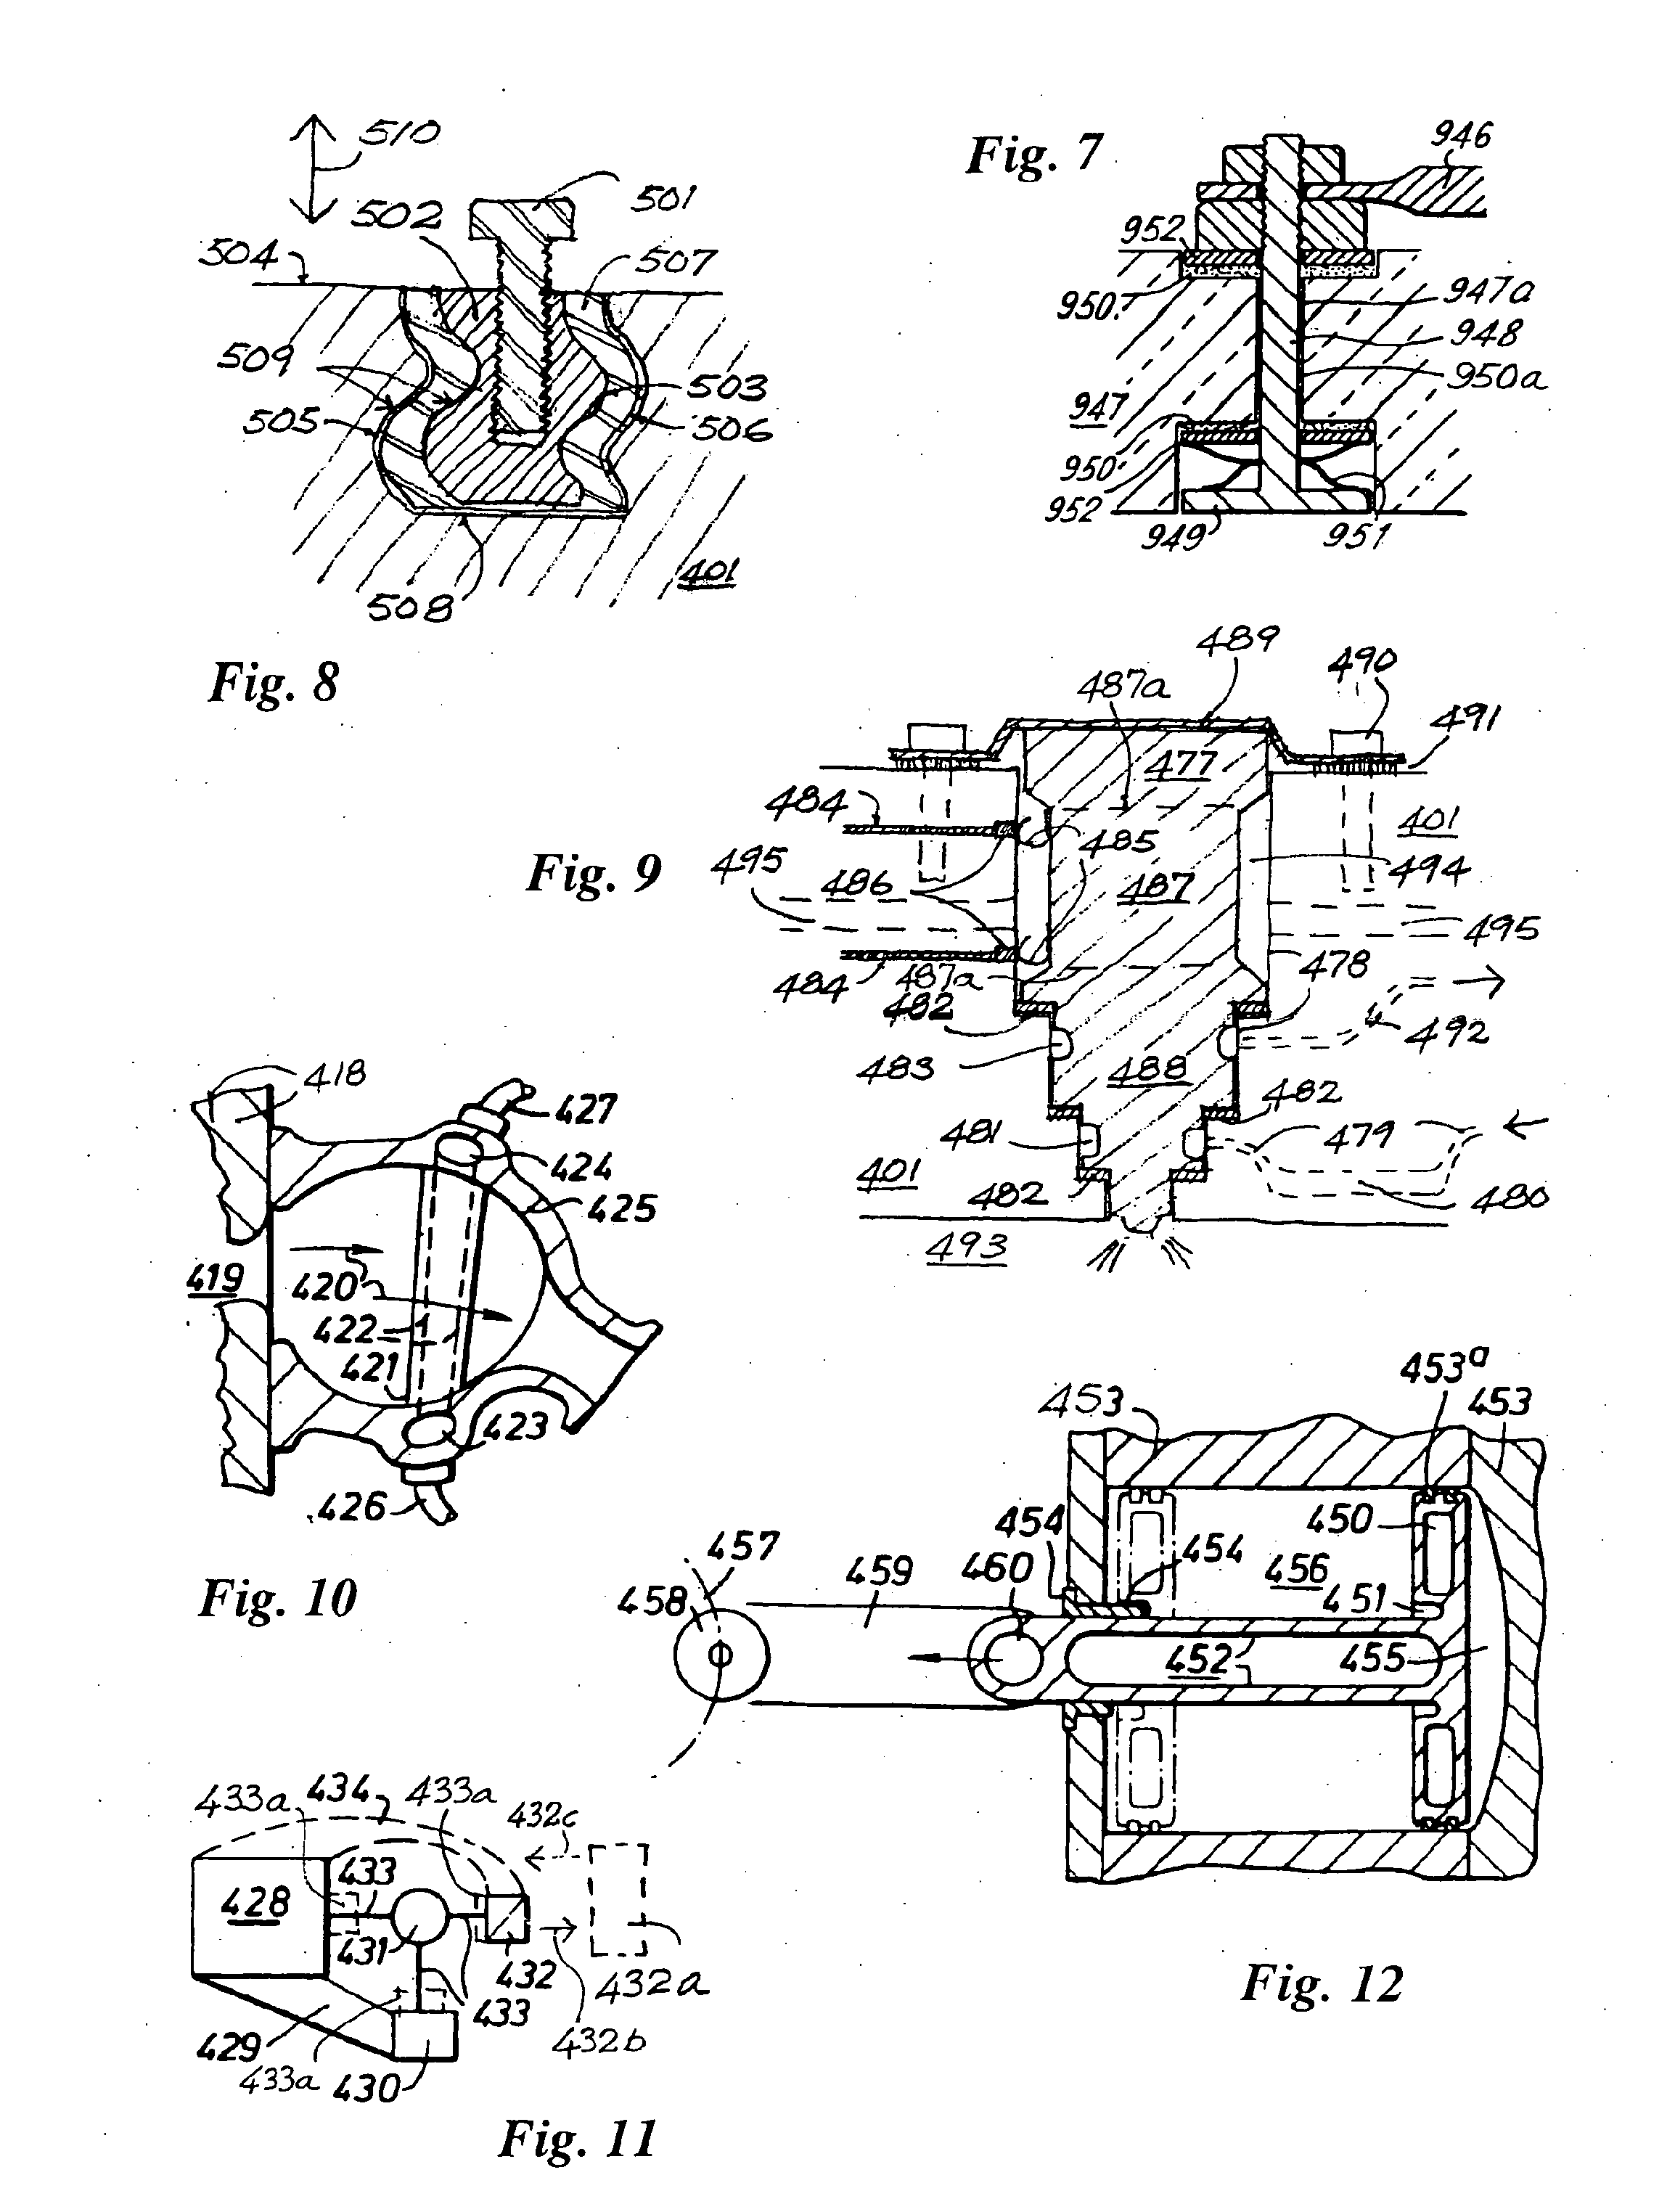 Reciprocating machine & other devices